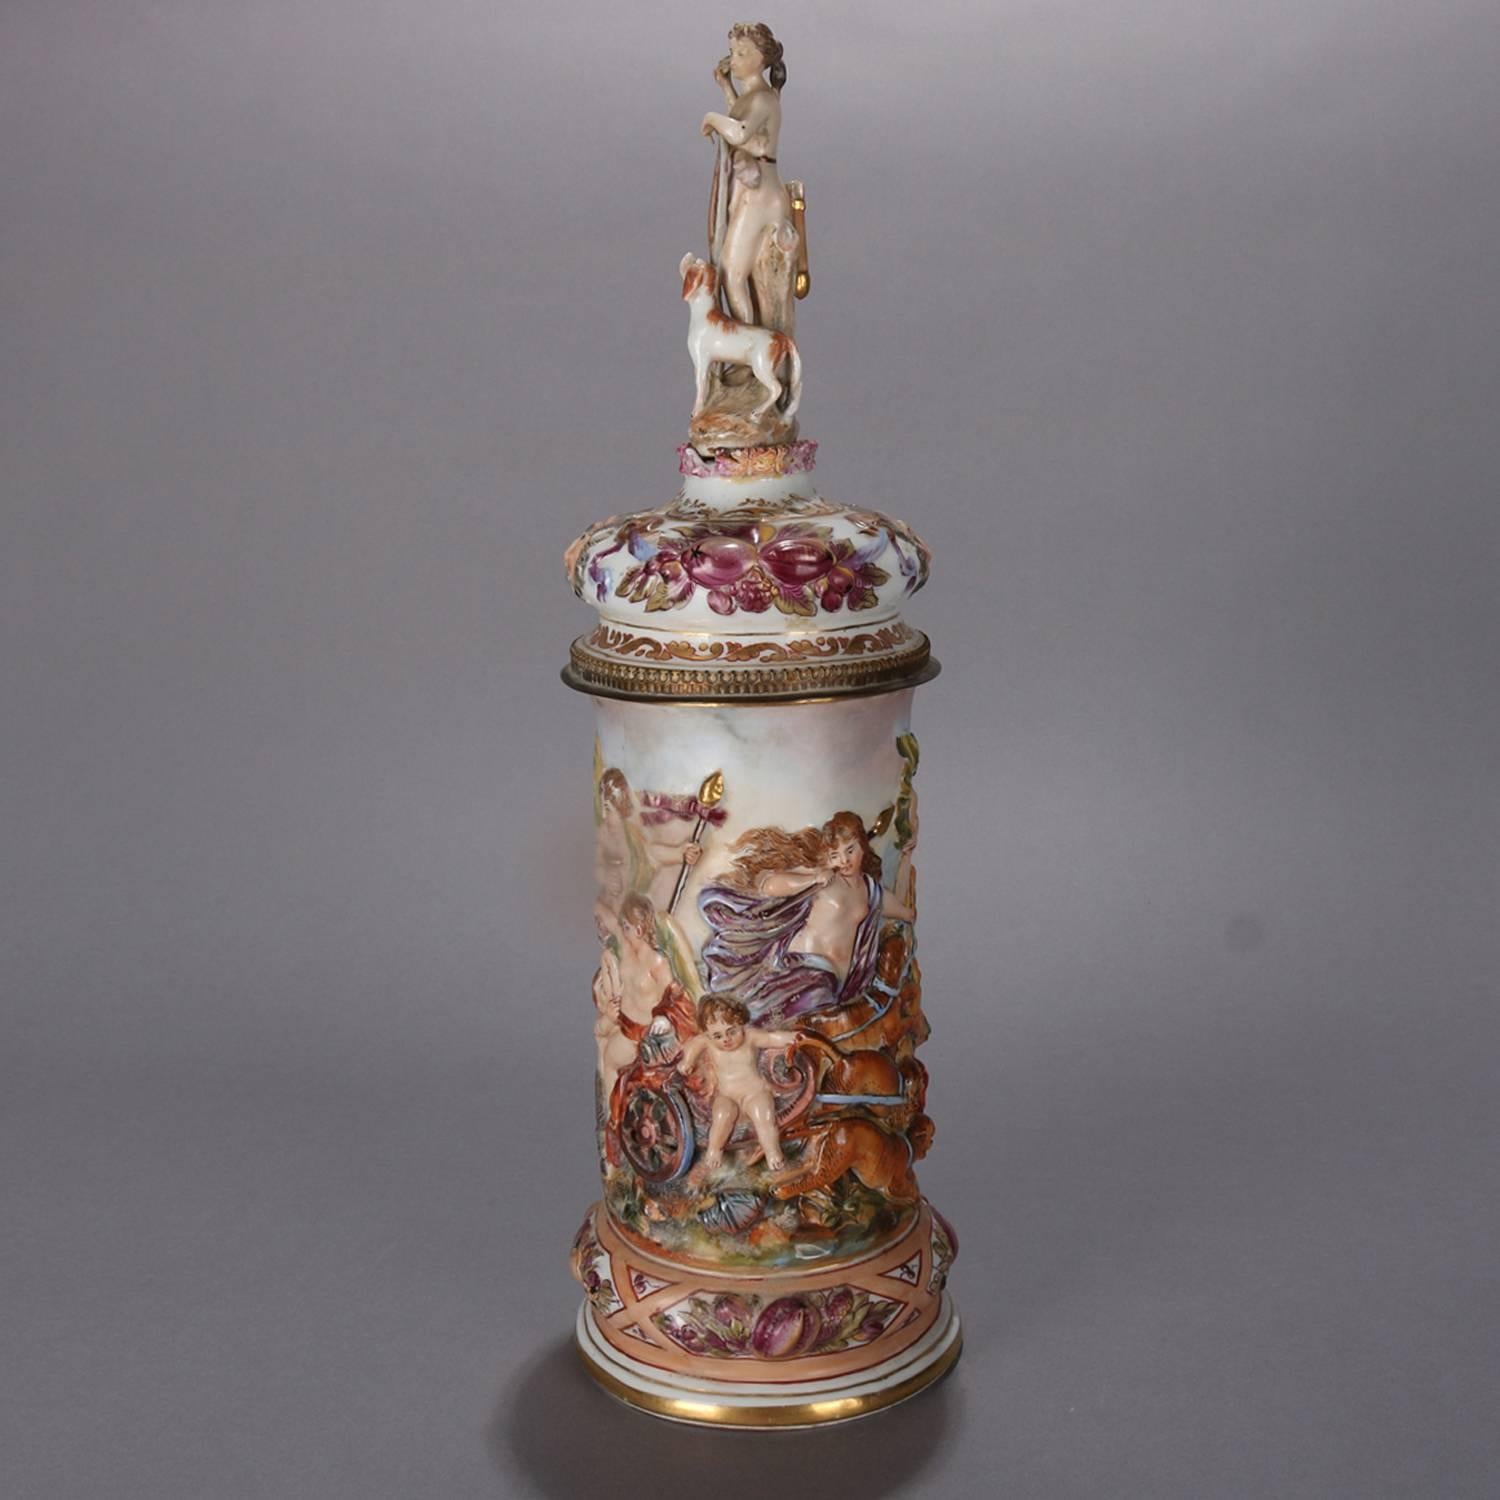 Oversized Italian Continental School high relief porcelain stein features high relief and hand-painted Classical scene with heavy gilt highlights, handle with mask and cast bronze eagle hinge, lid with figural finial, blue crown 